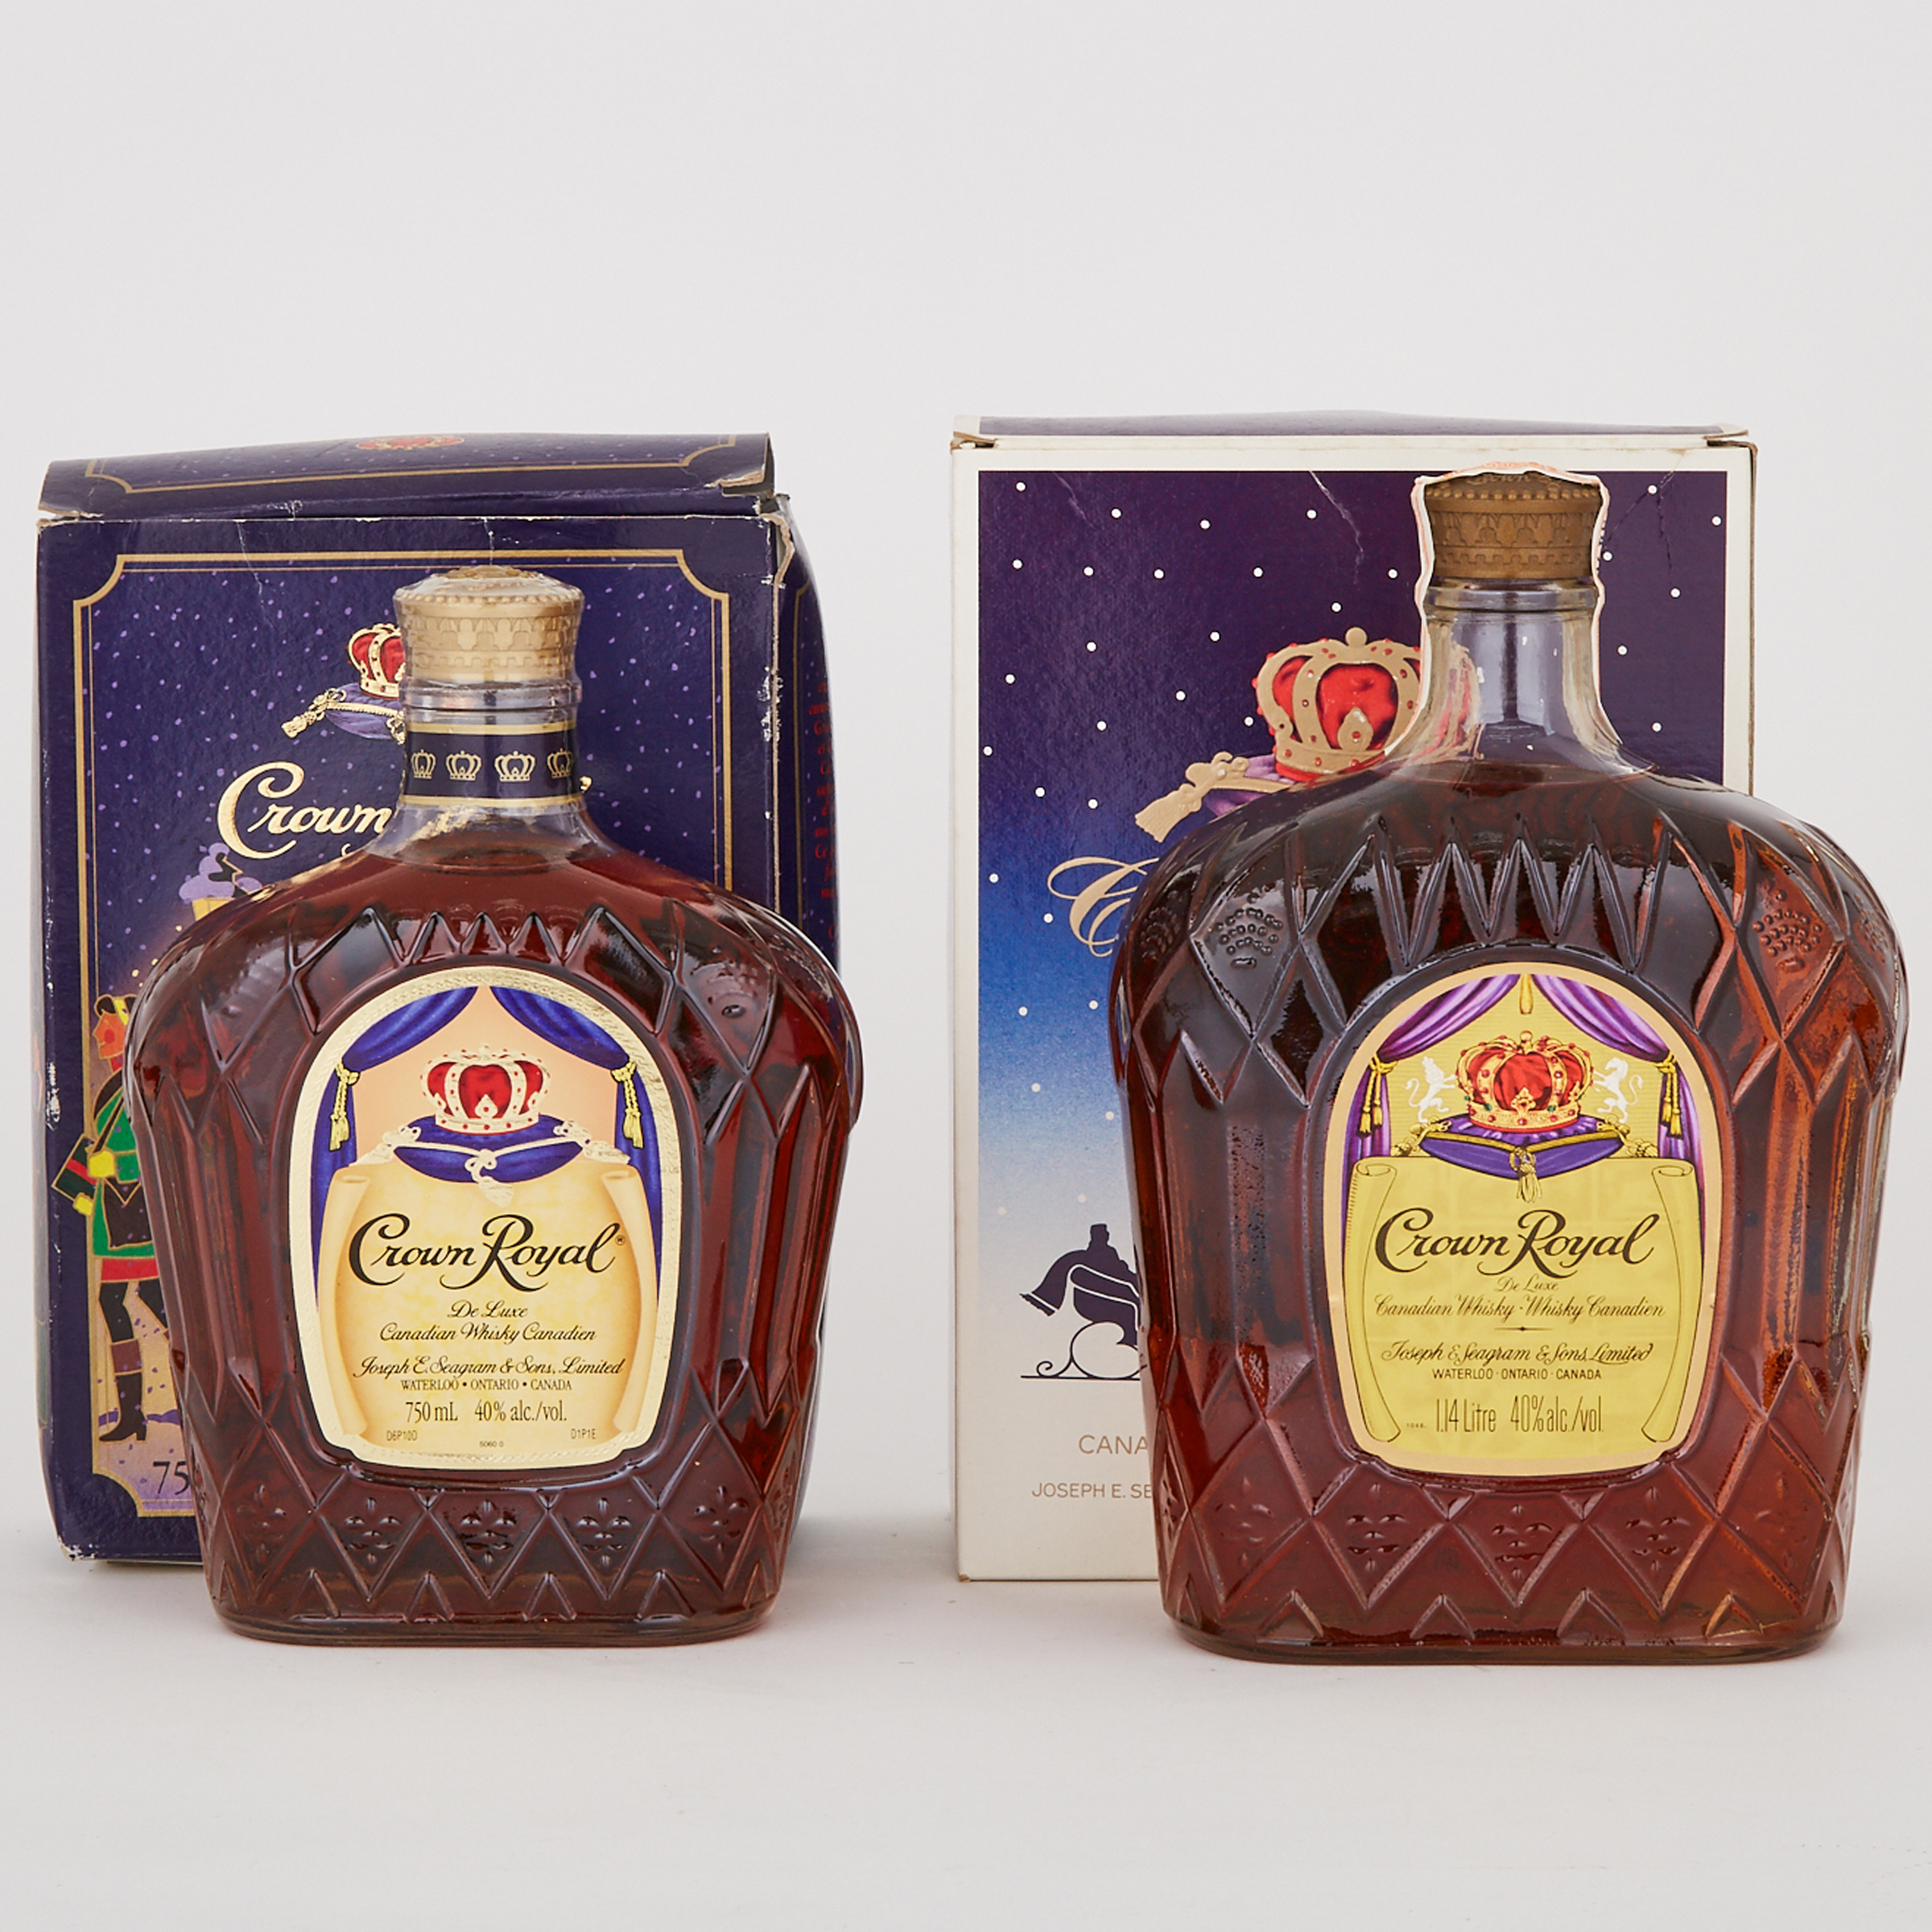 CROWN ROYAL DELUXE CANADIAN WHISKEY (ONE 1140 ML)
CROWN ROYAL DELUXE CANADIAN WHISKEY (ONE 750 ML)